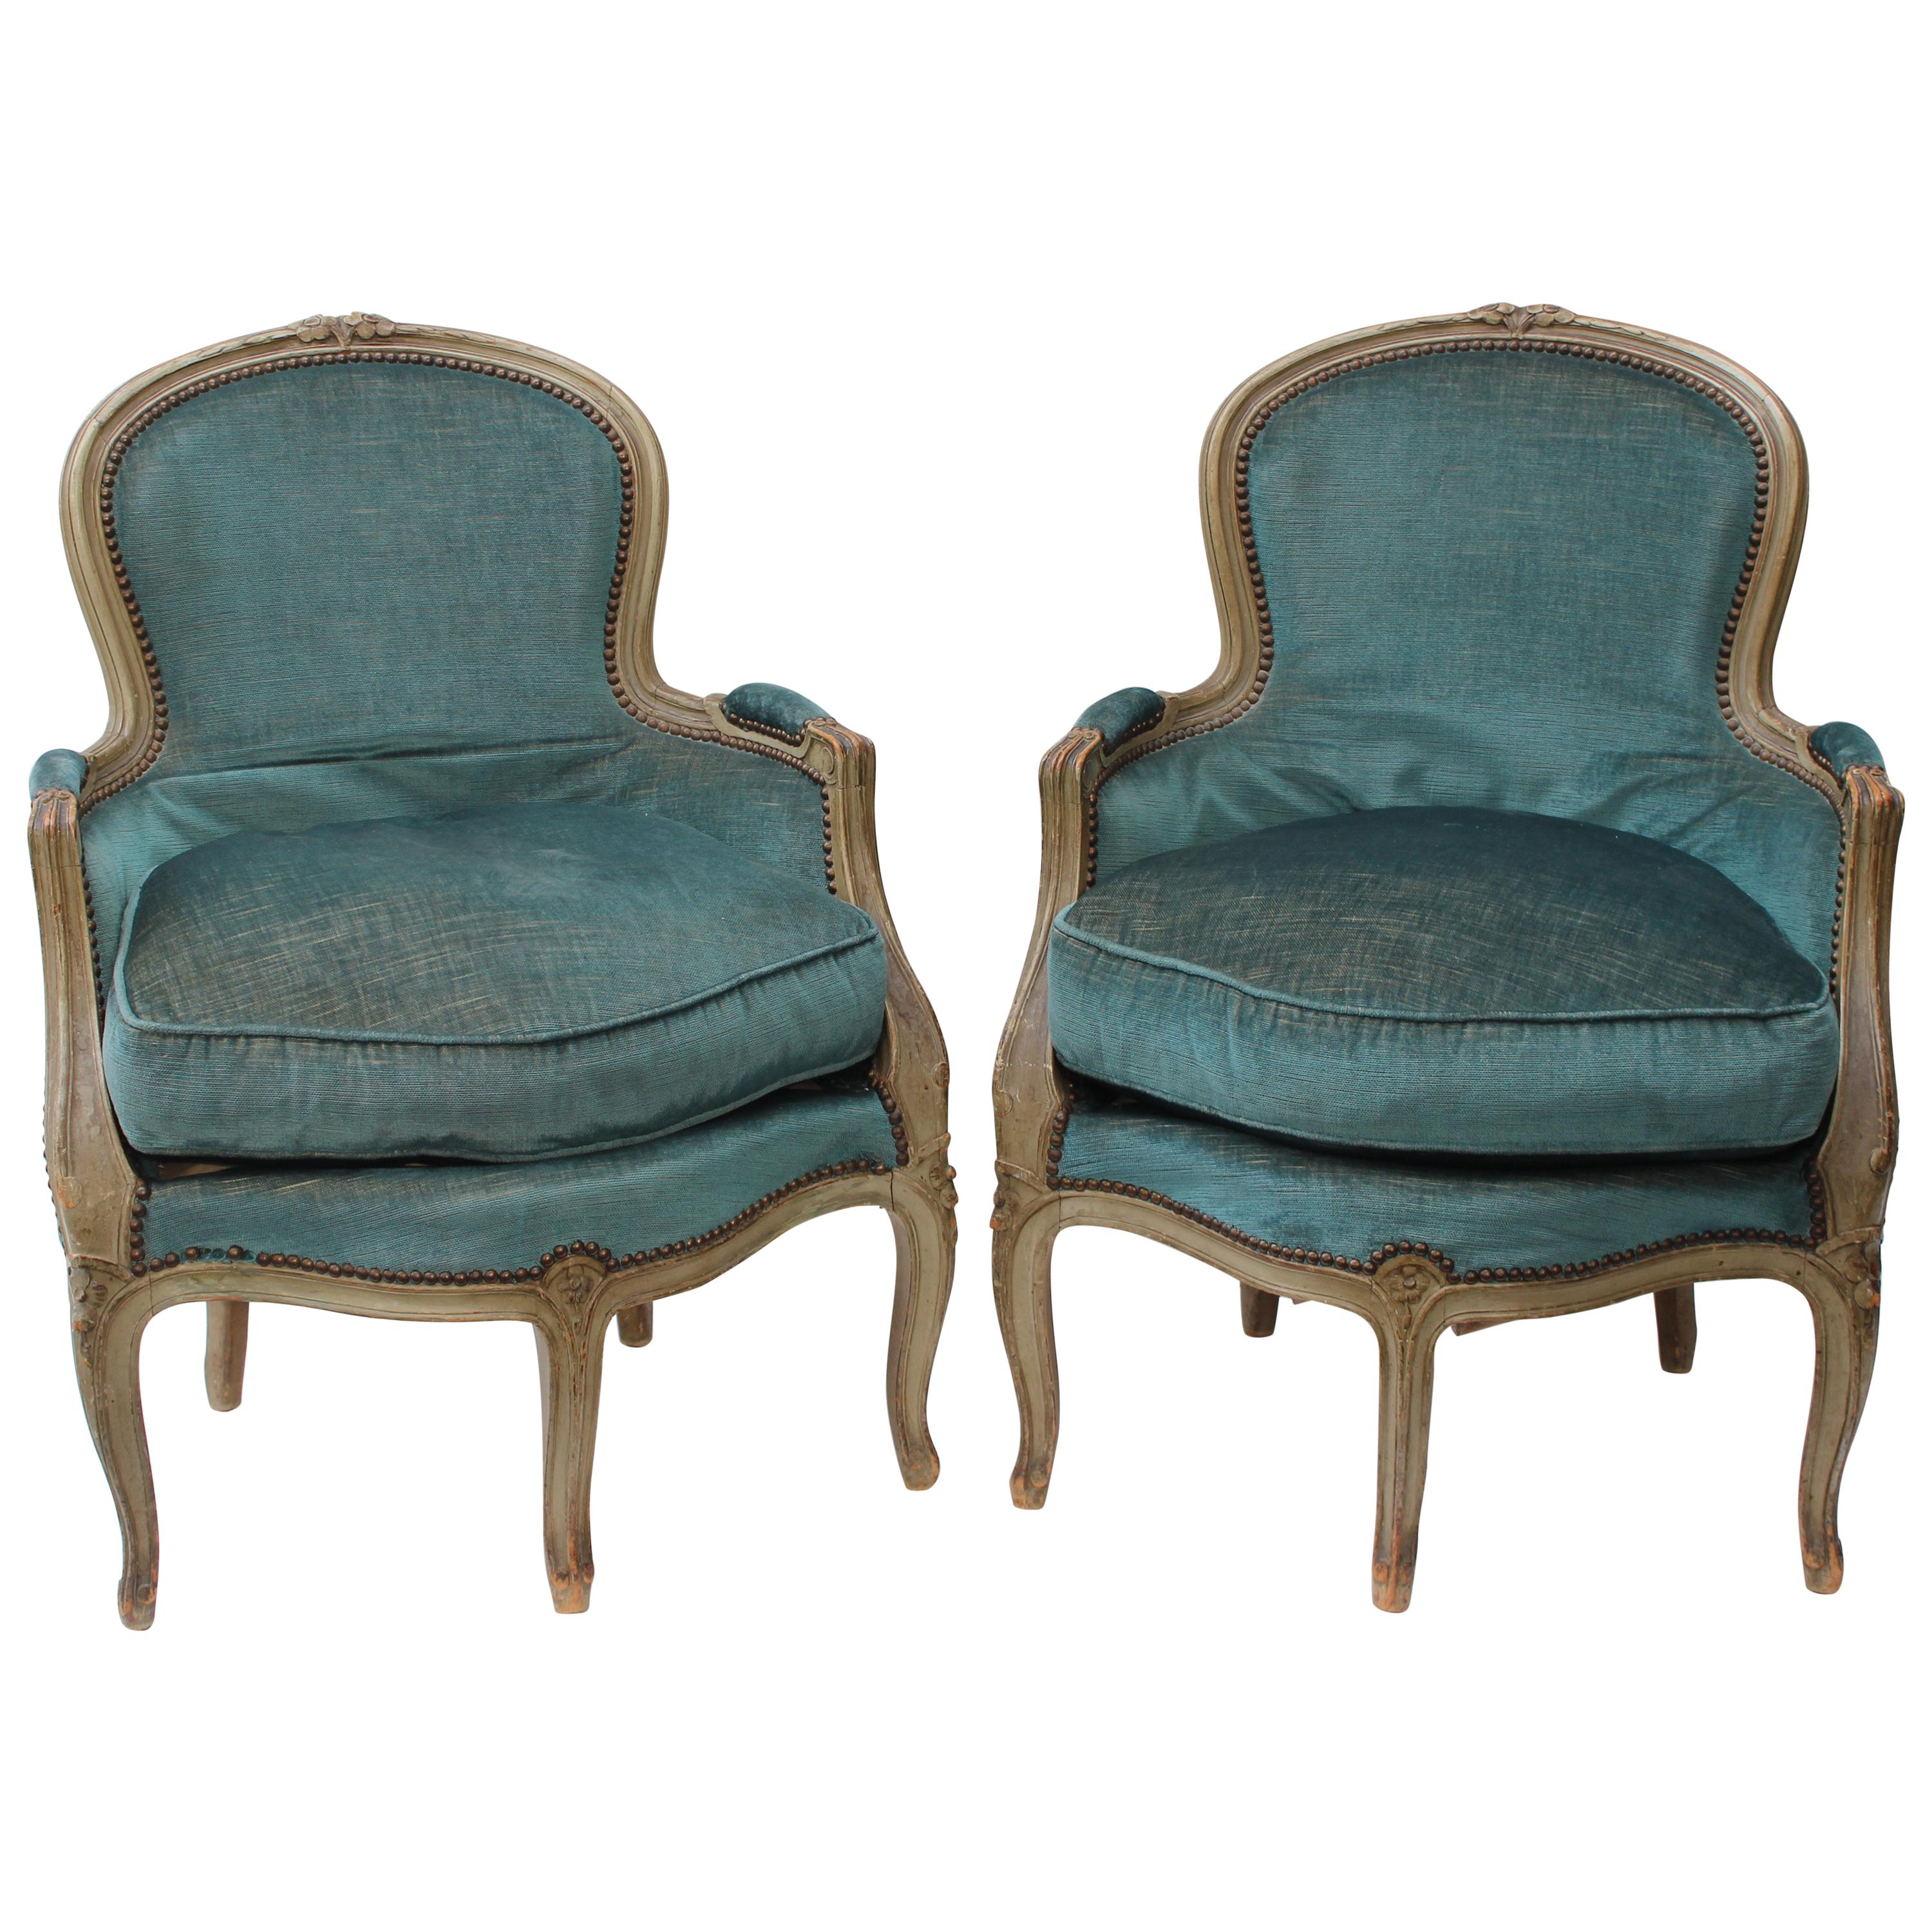 Pair of Louis XV Style Five-Legged Chairs